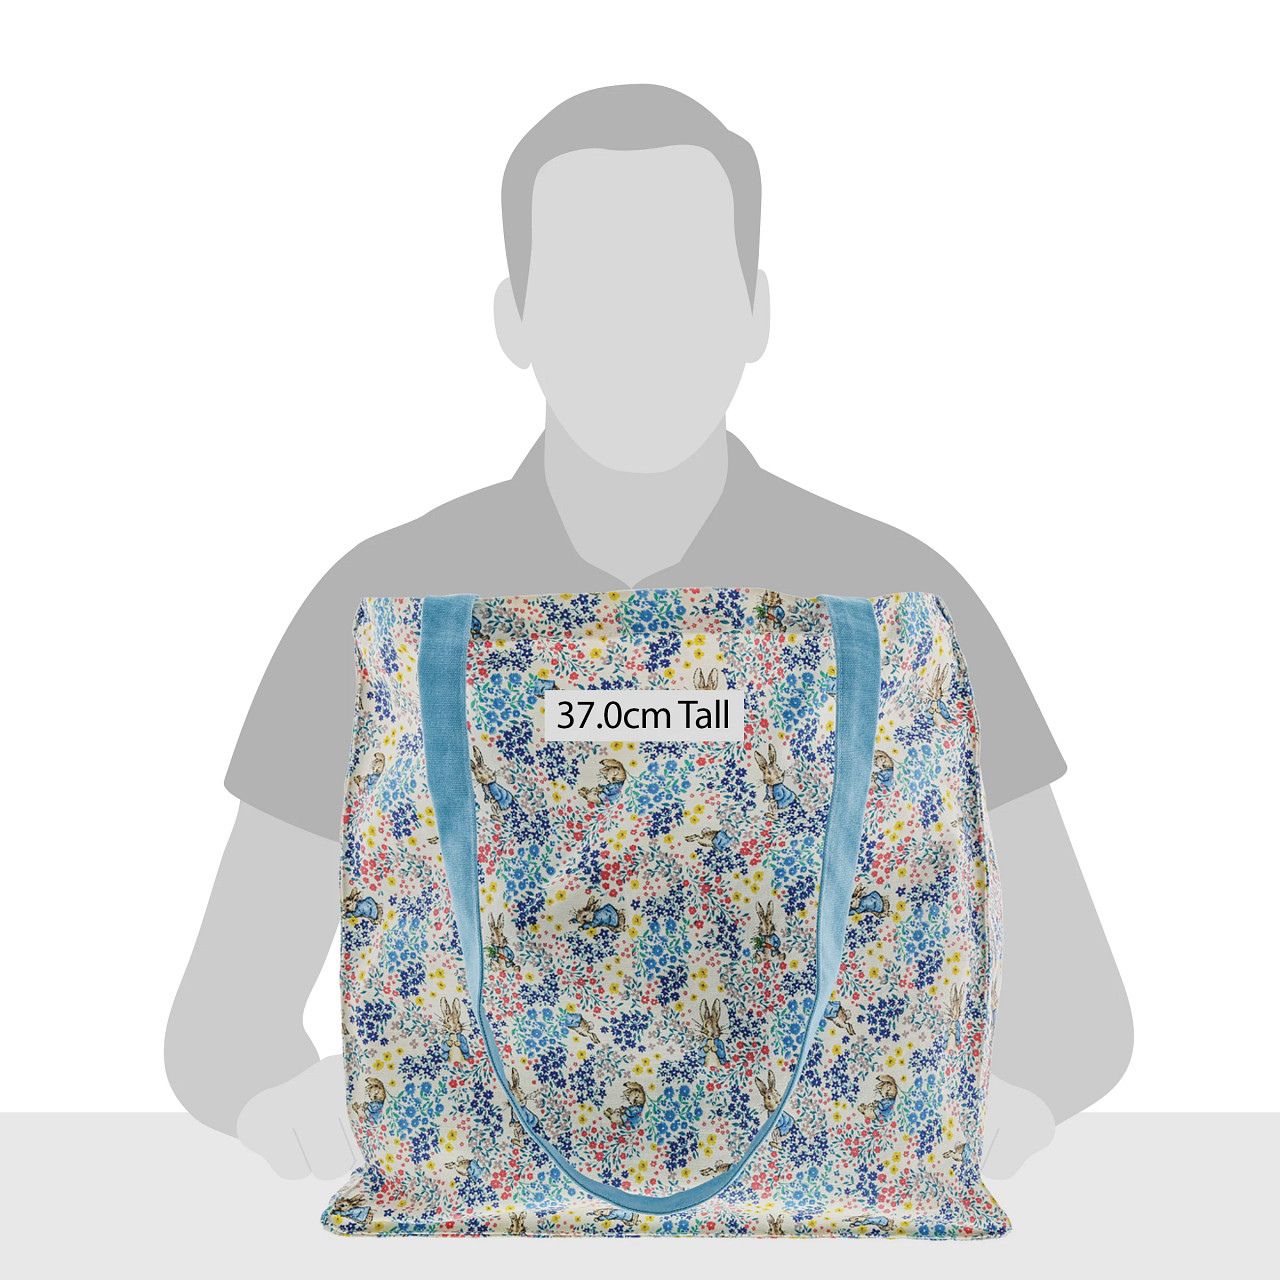 Beatrix Potter Peter Rabbit Garden Party Pop Up Tote Bag  Brand new from Enesco, this Peter Rabbit Garden Party Pop Up Tote Bag is the perfect accessory for anyone on the go. 